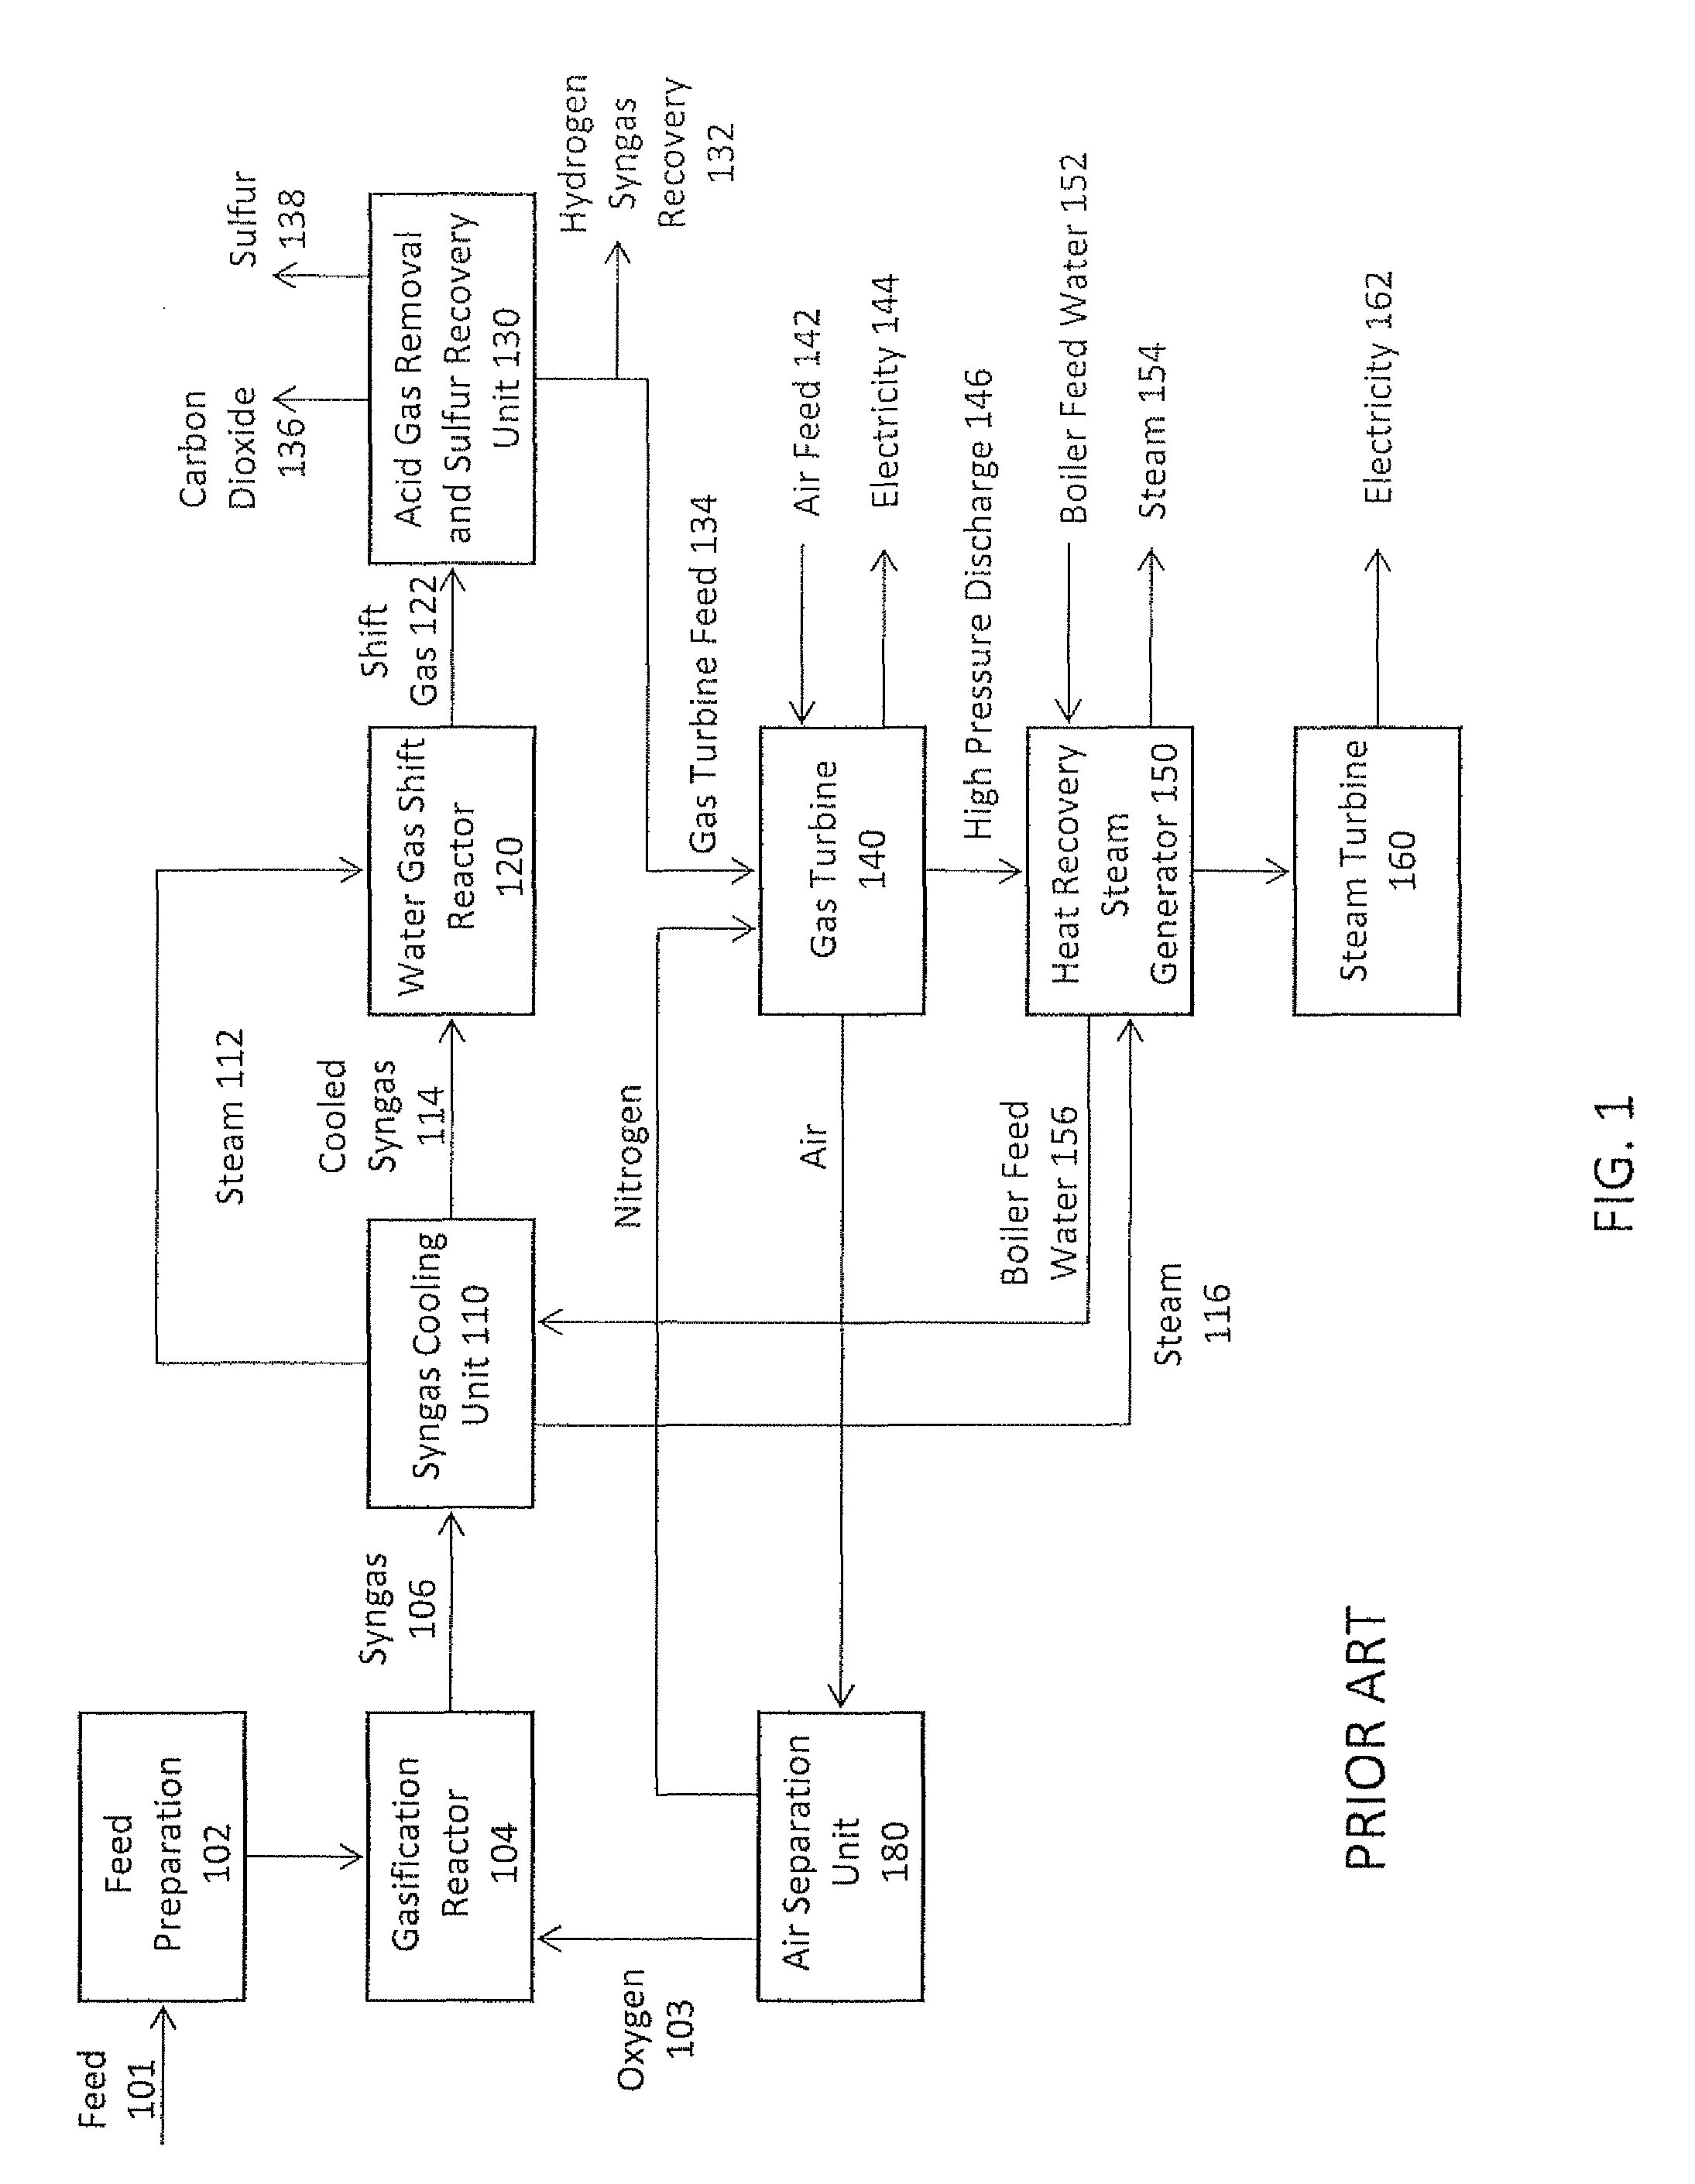 Process for the gasification of heavy residual oil with particulate coke from a delayed coking unit